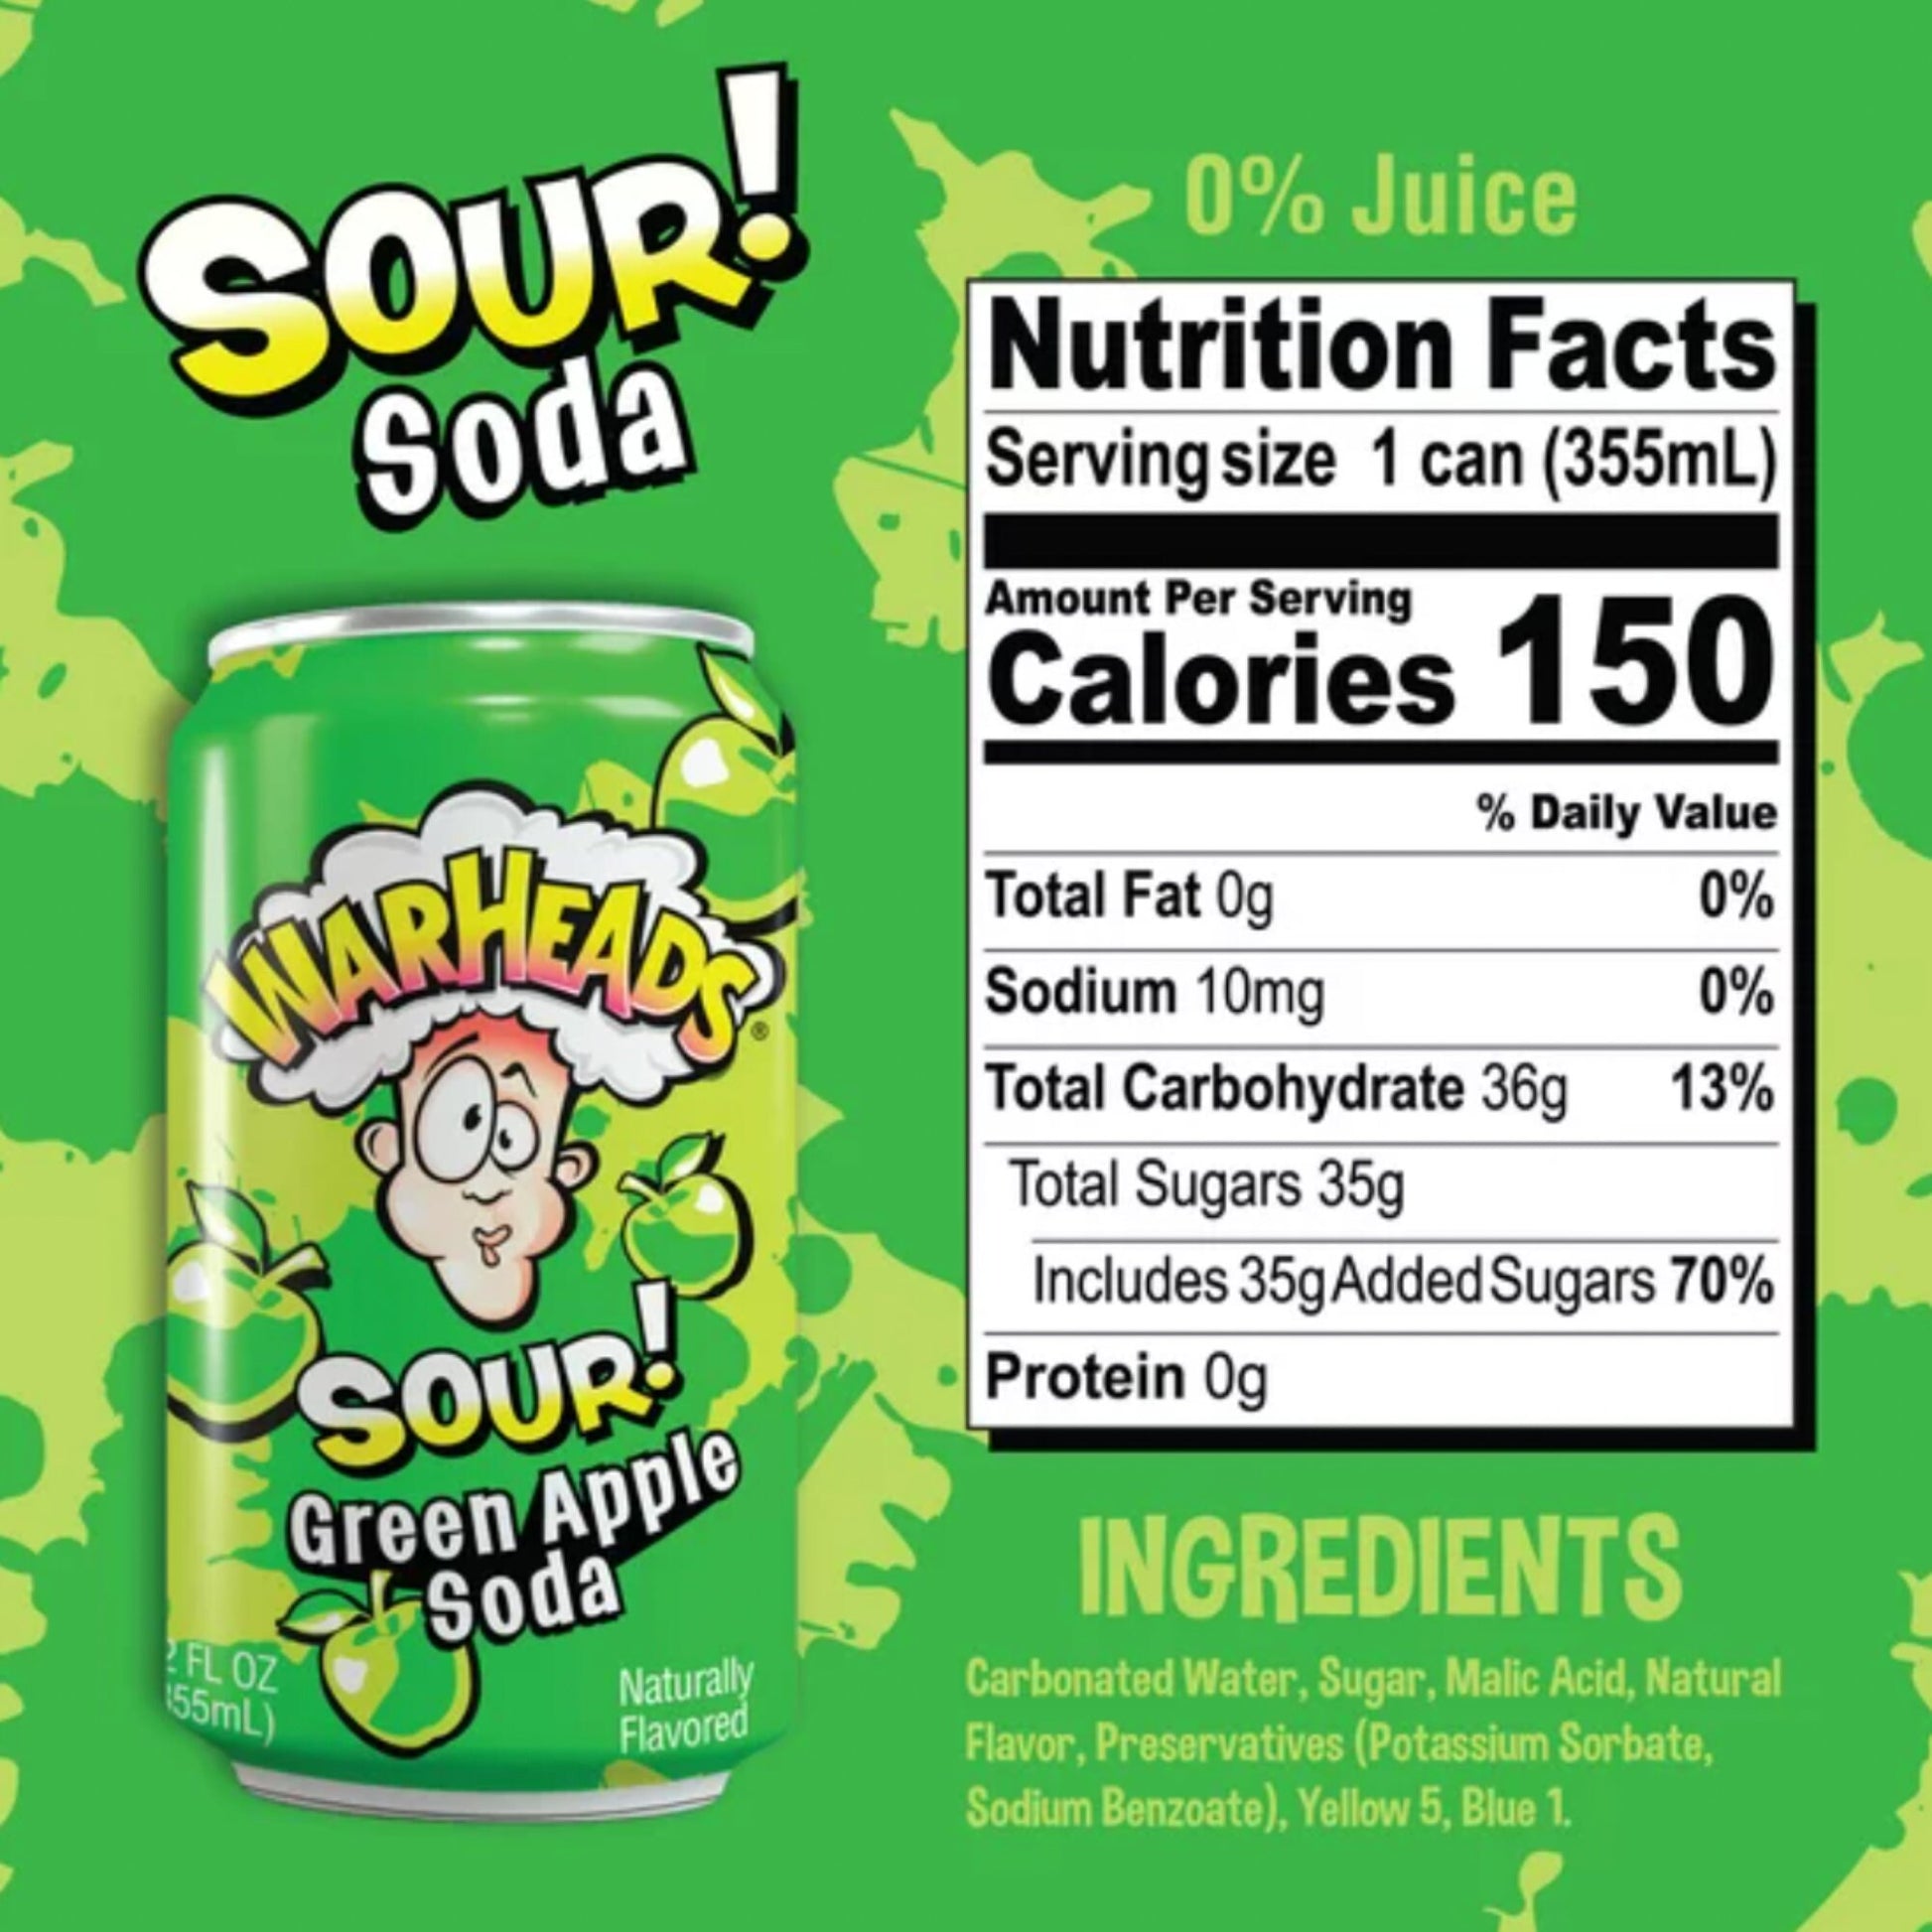 Sour Green Apple Warheads Soda - Nutrition Facts & Ingredients